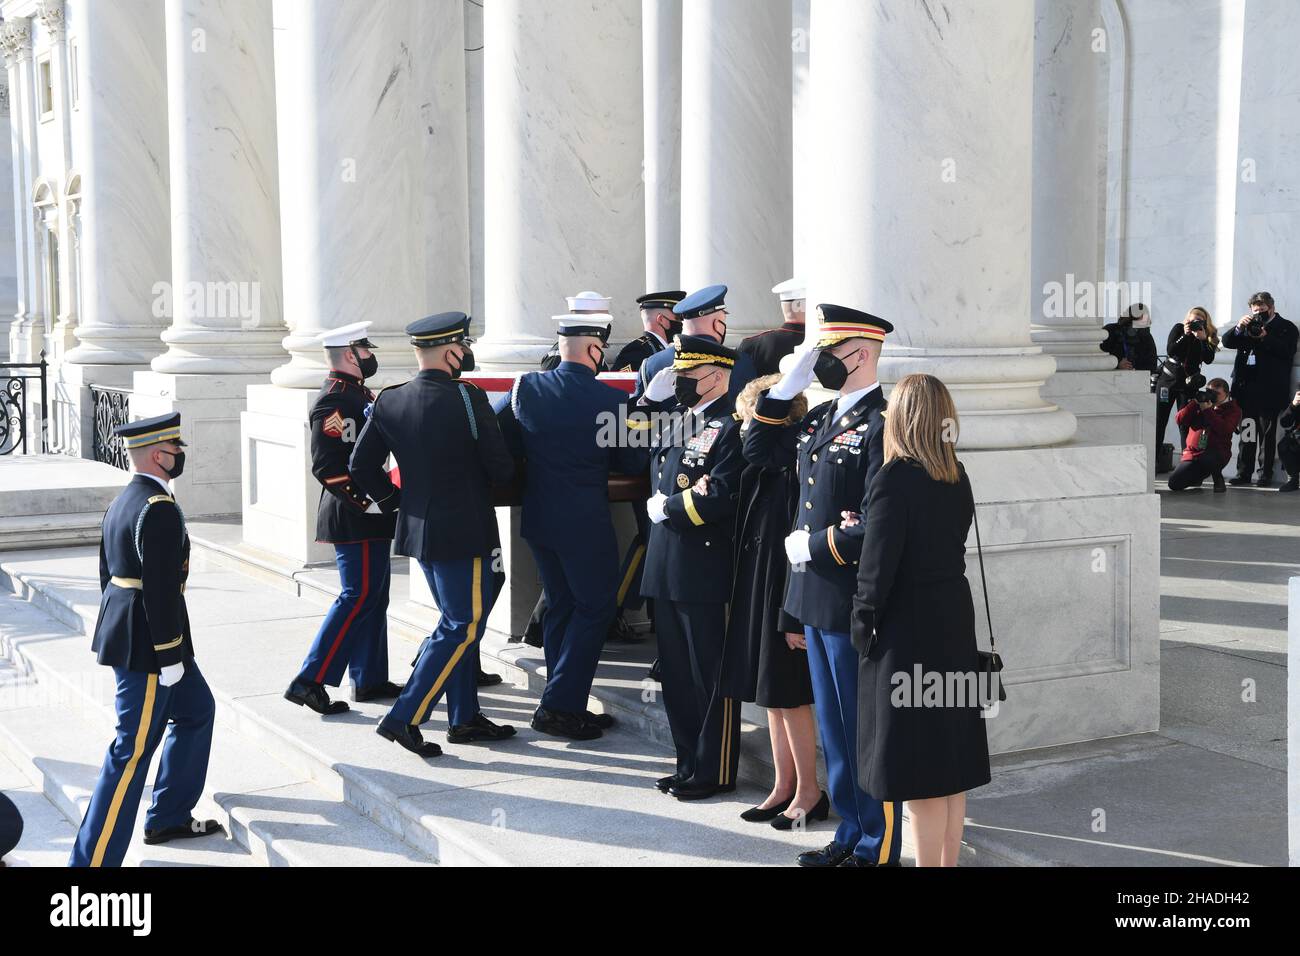 Washington, United States of America. 09 December, 2021. U.S. Armed Forces honor guard carry the flag-draped casket of World War II veteran and former Senator Robert Dole up the steps of the U.S. Capitol where it will lay in state, December 9, 2021 in Washington, D.C. Senator Dole died at age 98 following a lifetime of service to the nation.  Credit: Cpl. XaViera Masline/U.S. Army/Alamy Live News Stock Photo